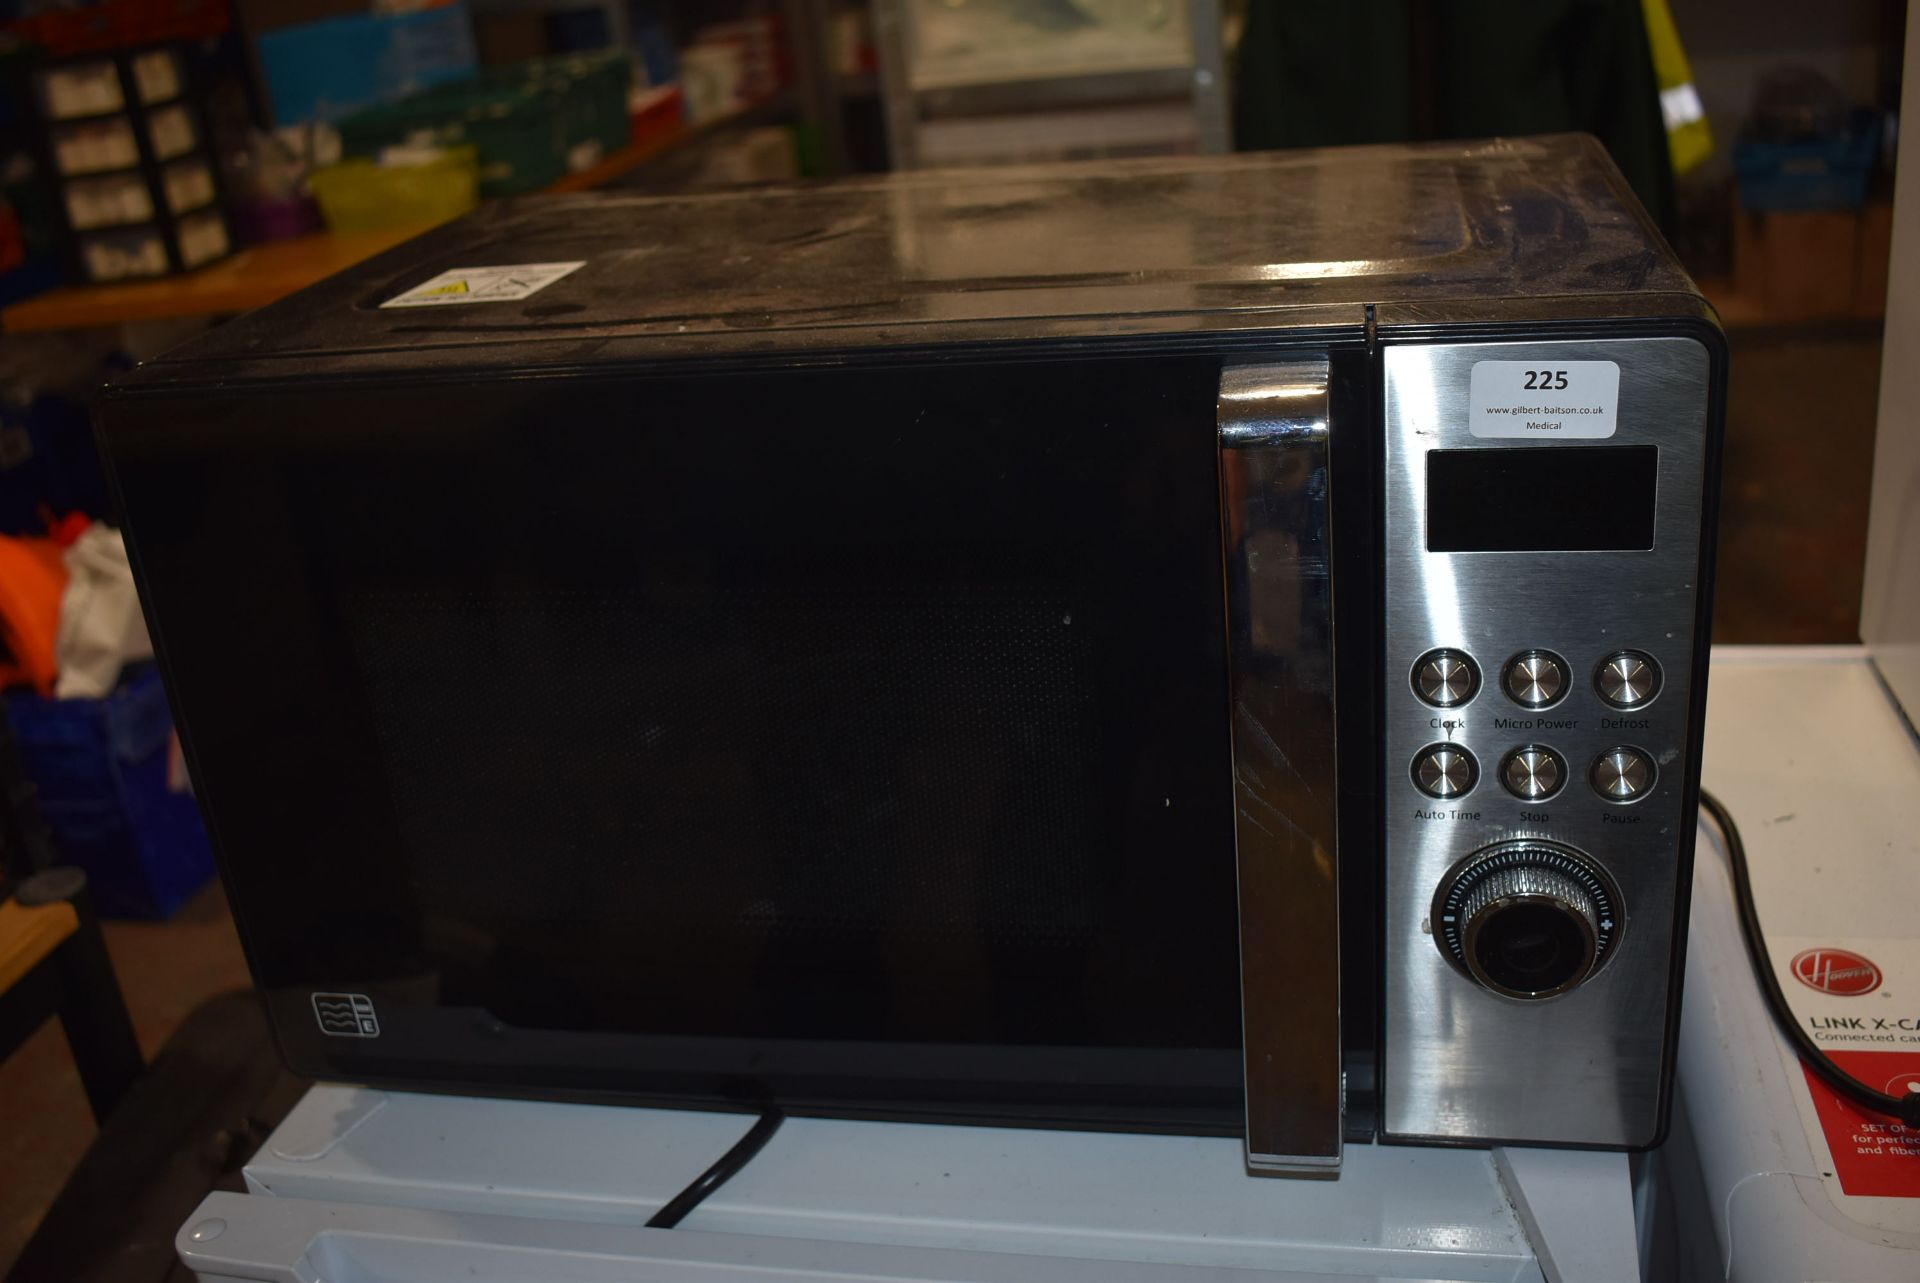 *Microwave Oven